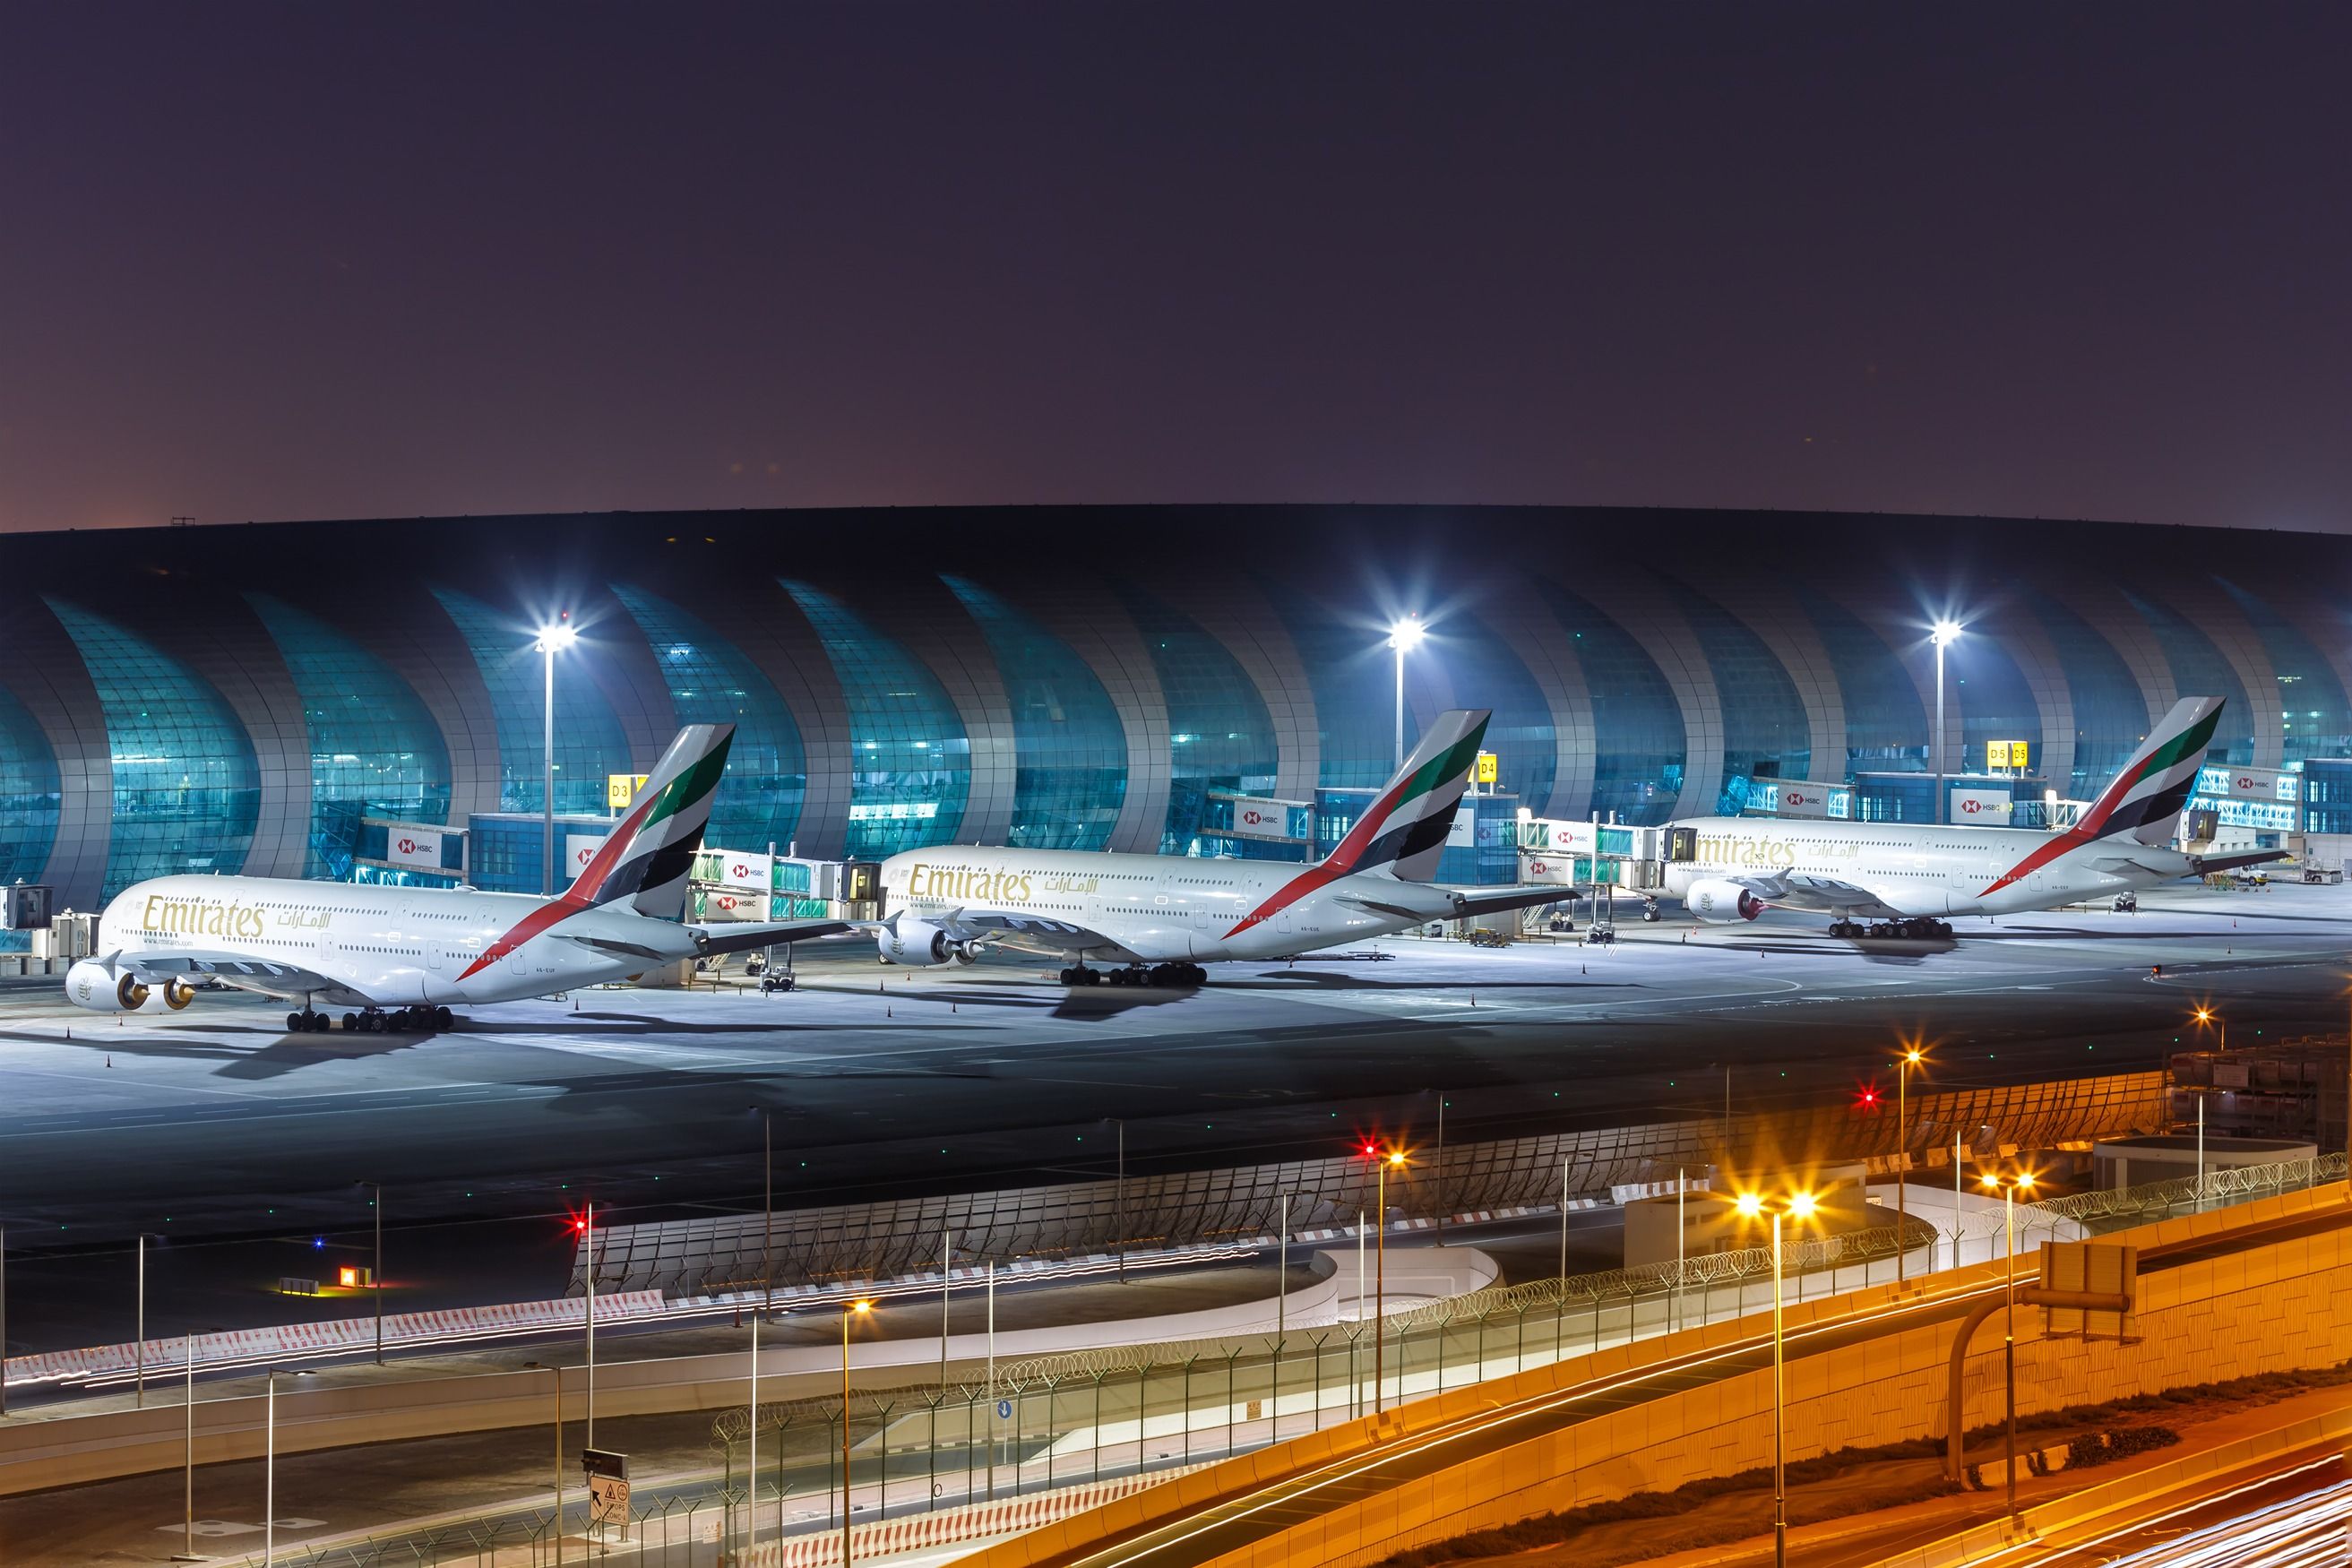 Emirates Airbus A380s DXB shutterstock_1994899532